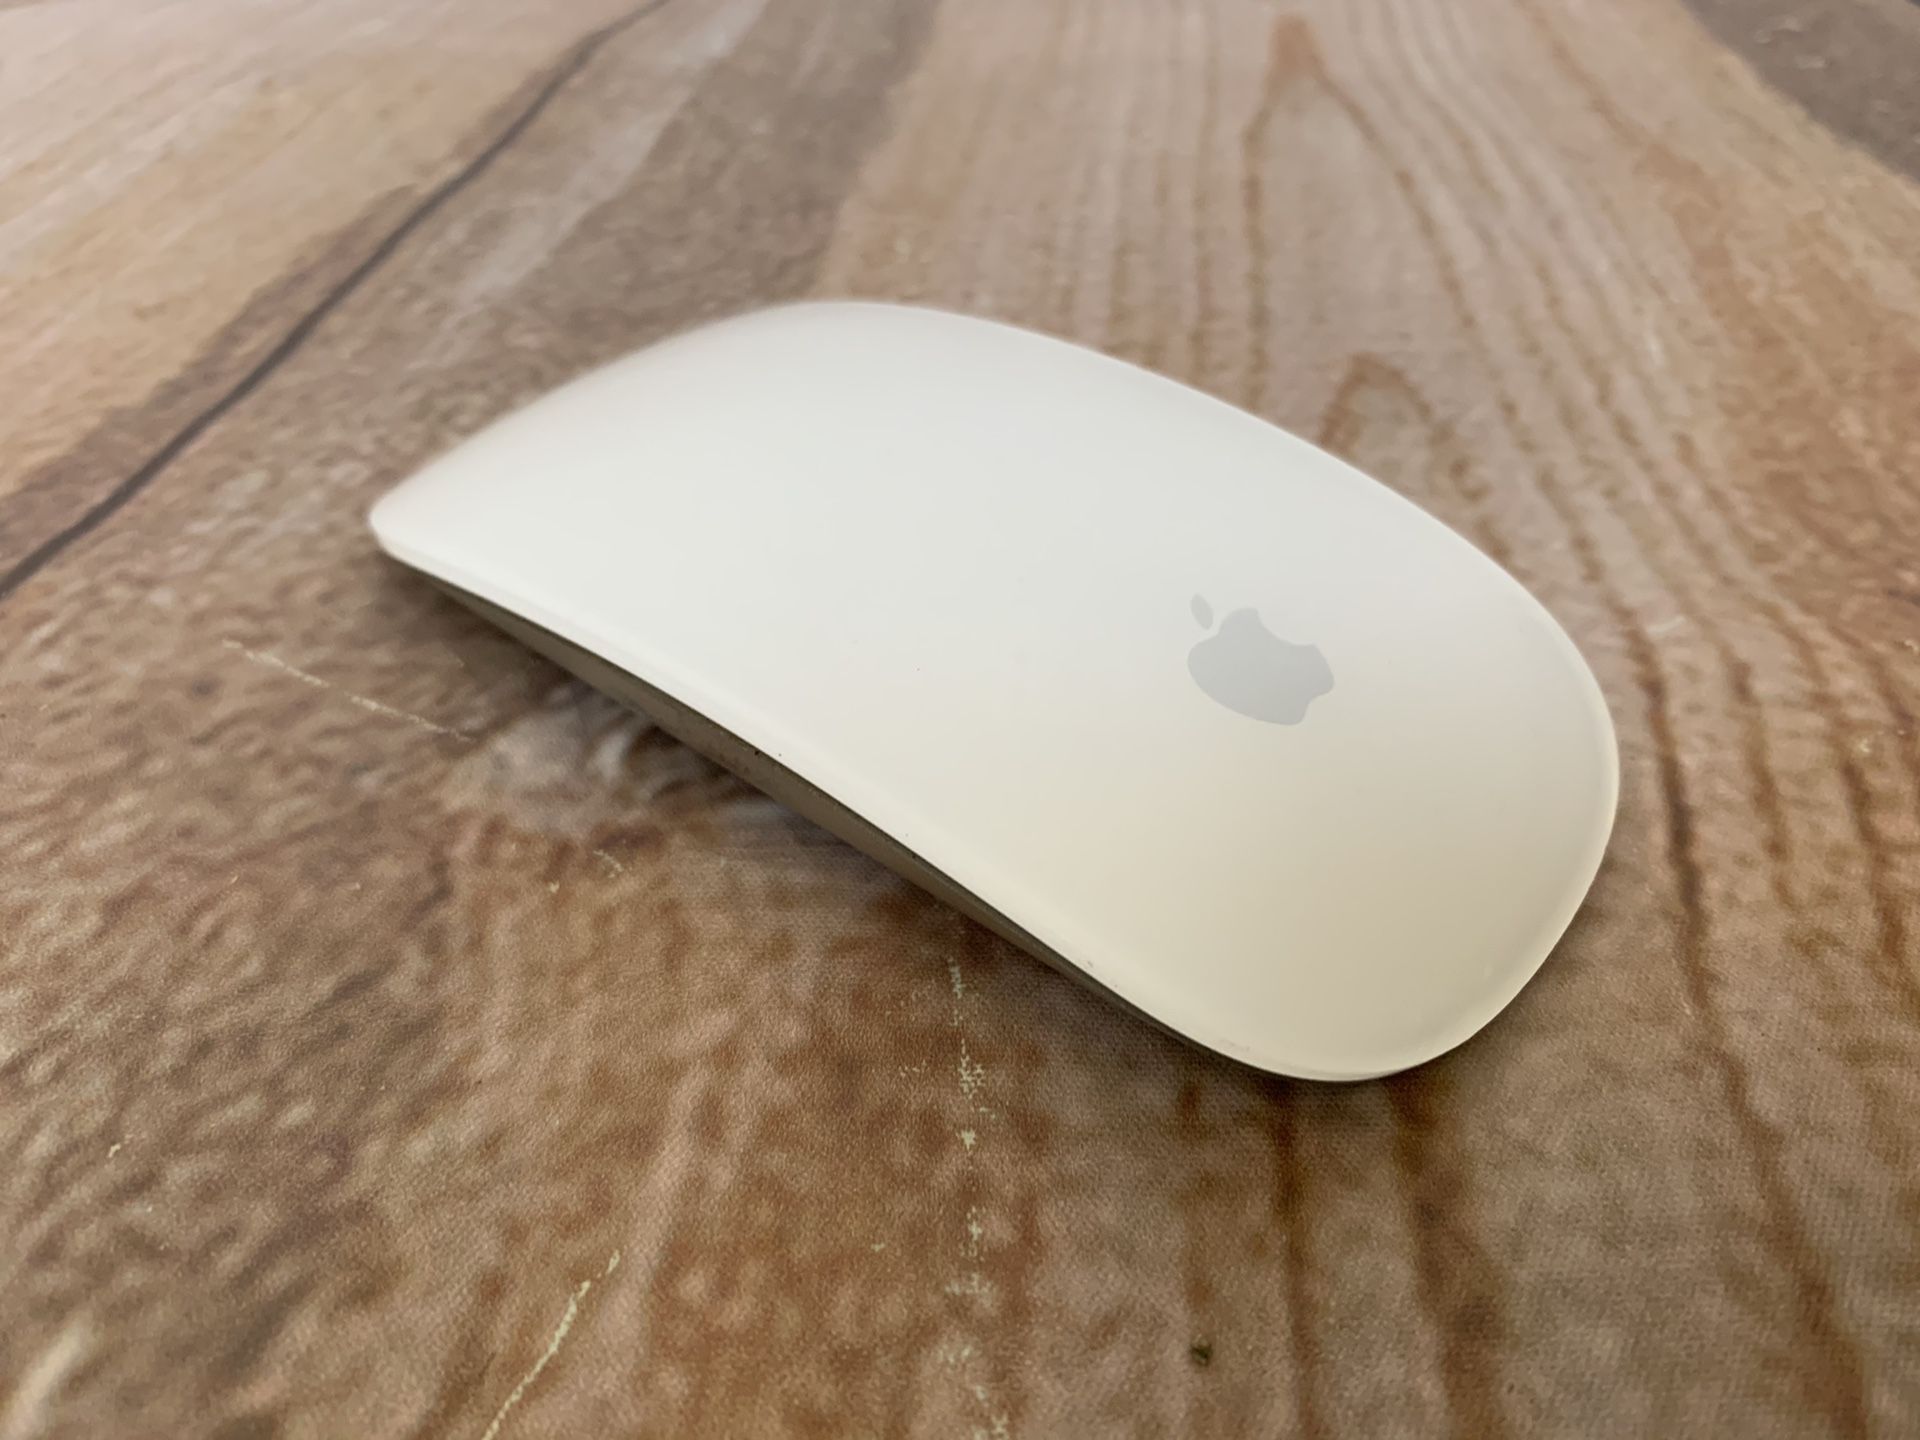 Apple Magic Mouse Bluetooth Wireless Model A1296 Works Great